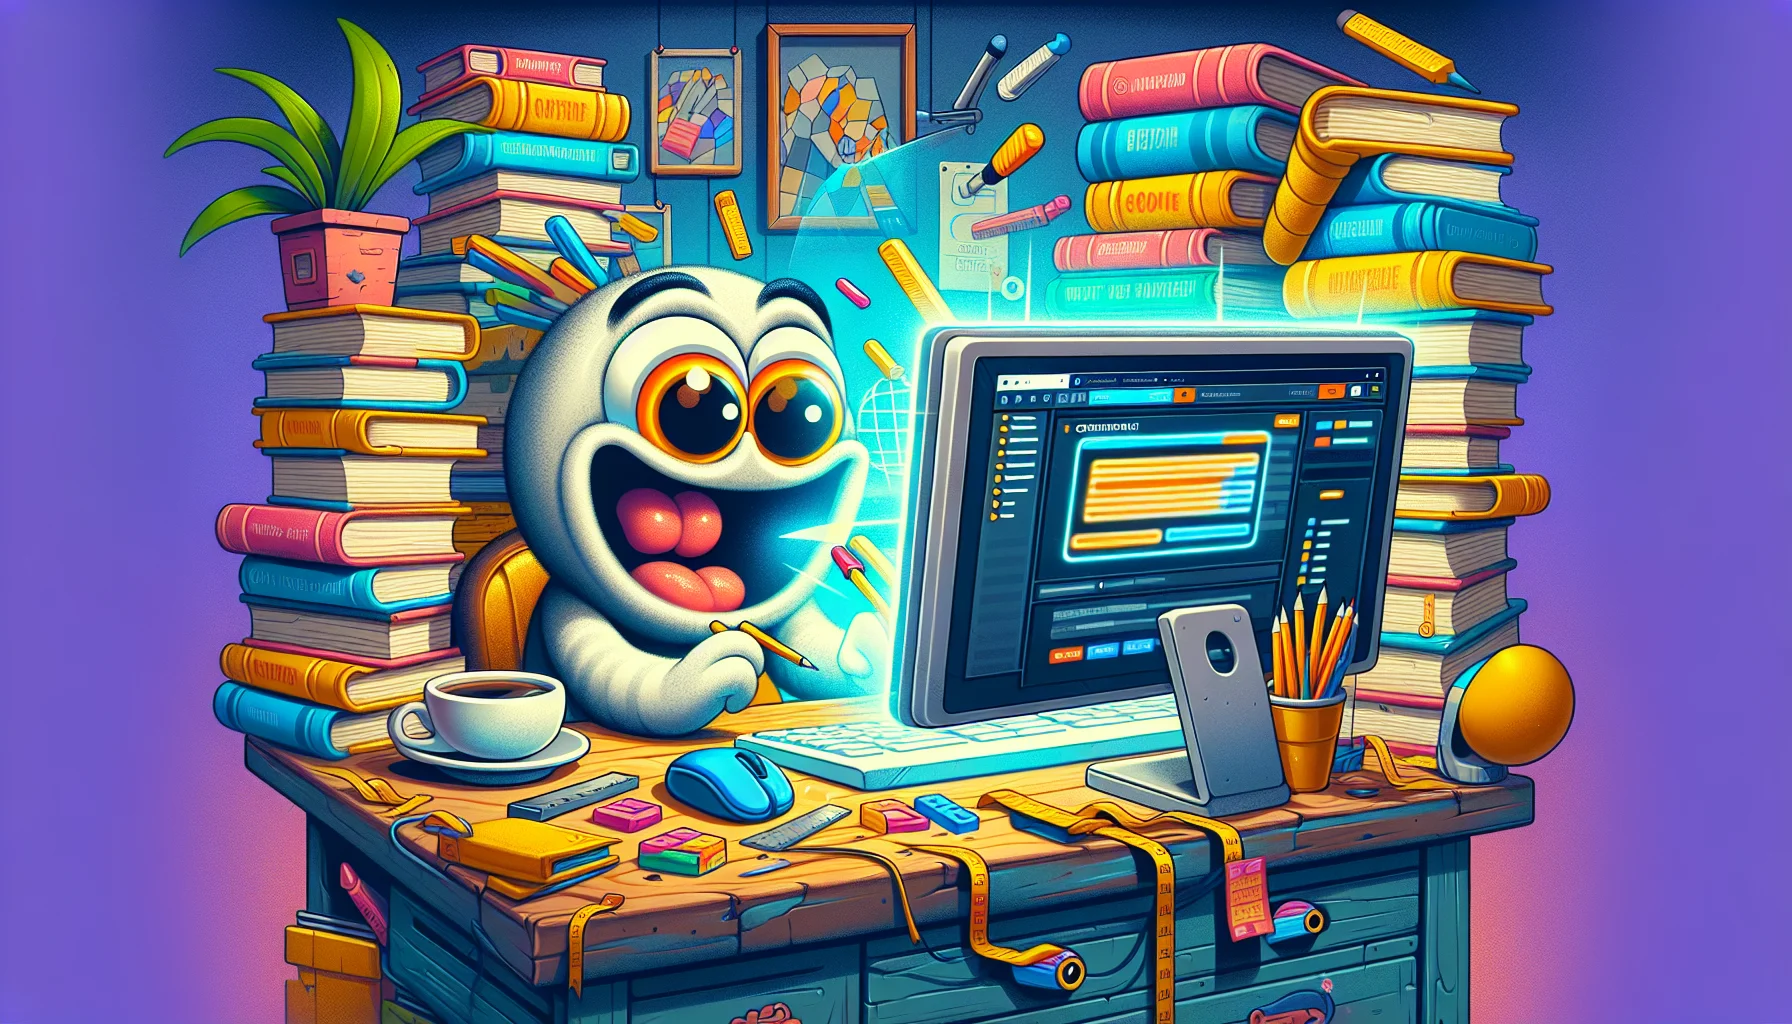 Create a humorous and enticing image of an abstract character happily engaged in a web hosting tutorial using a generic website builder. They are sitting at a vintage desk, surrounded by stacks of colorful books about web development. The computer screen shows a glowing web page under construction with all the possible tools. There are humorous elements in the scene, like a coffee cup spilling over the desk, a surprised cat looking at the screen, and a plant bending towards the computer as if intrigued. The image conveys the fun and satisfaction of building a website with a user-friendly tool.